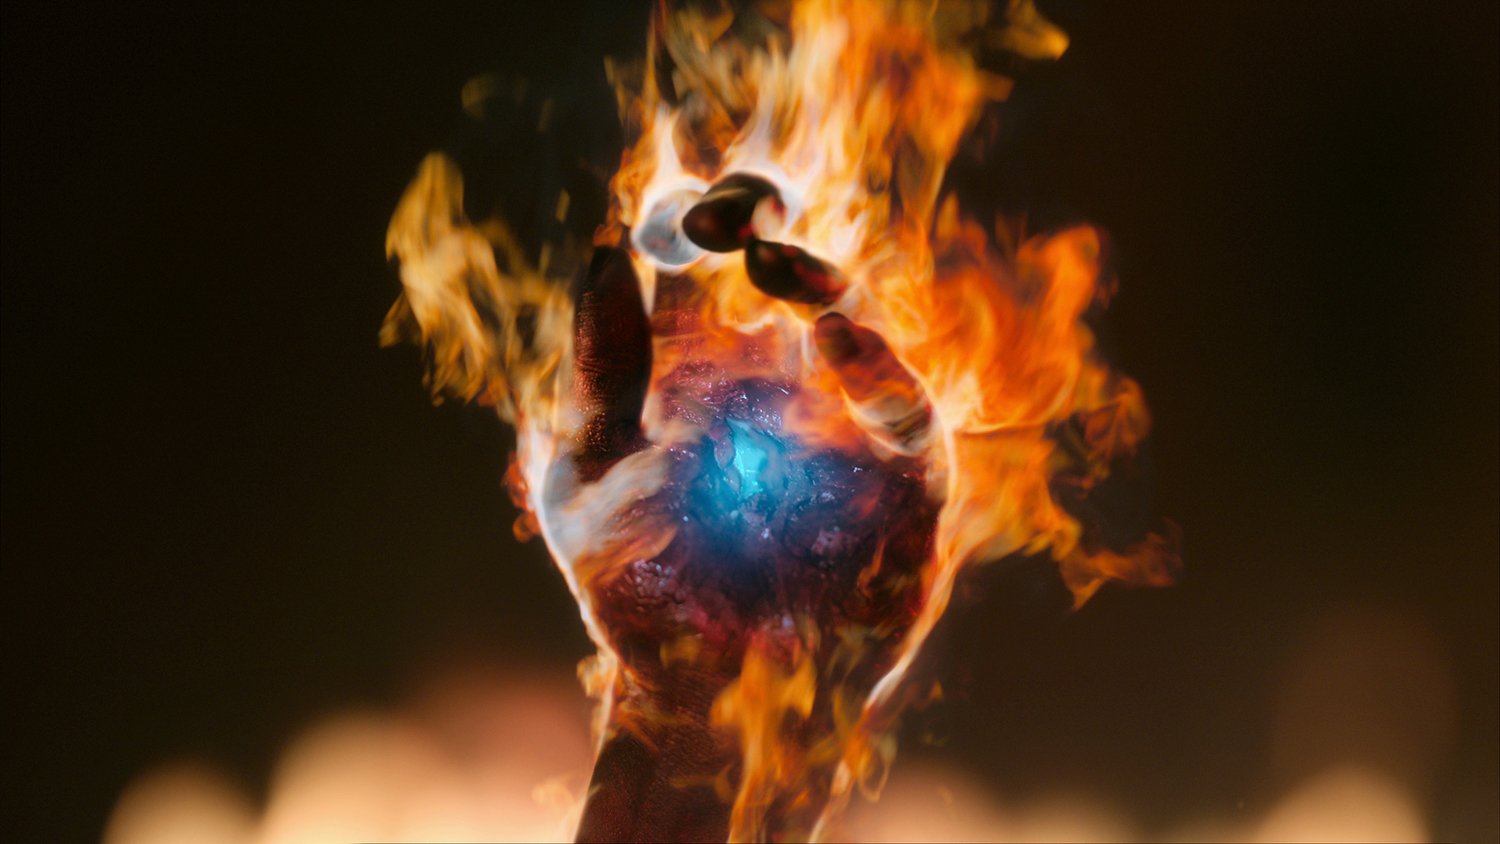 A hand on fire with sapphire in its palm in Manifest Season 4 on Netflix